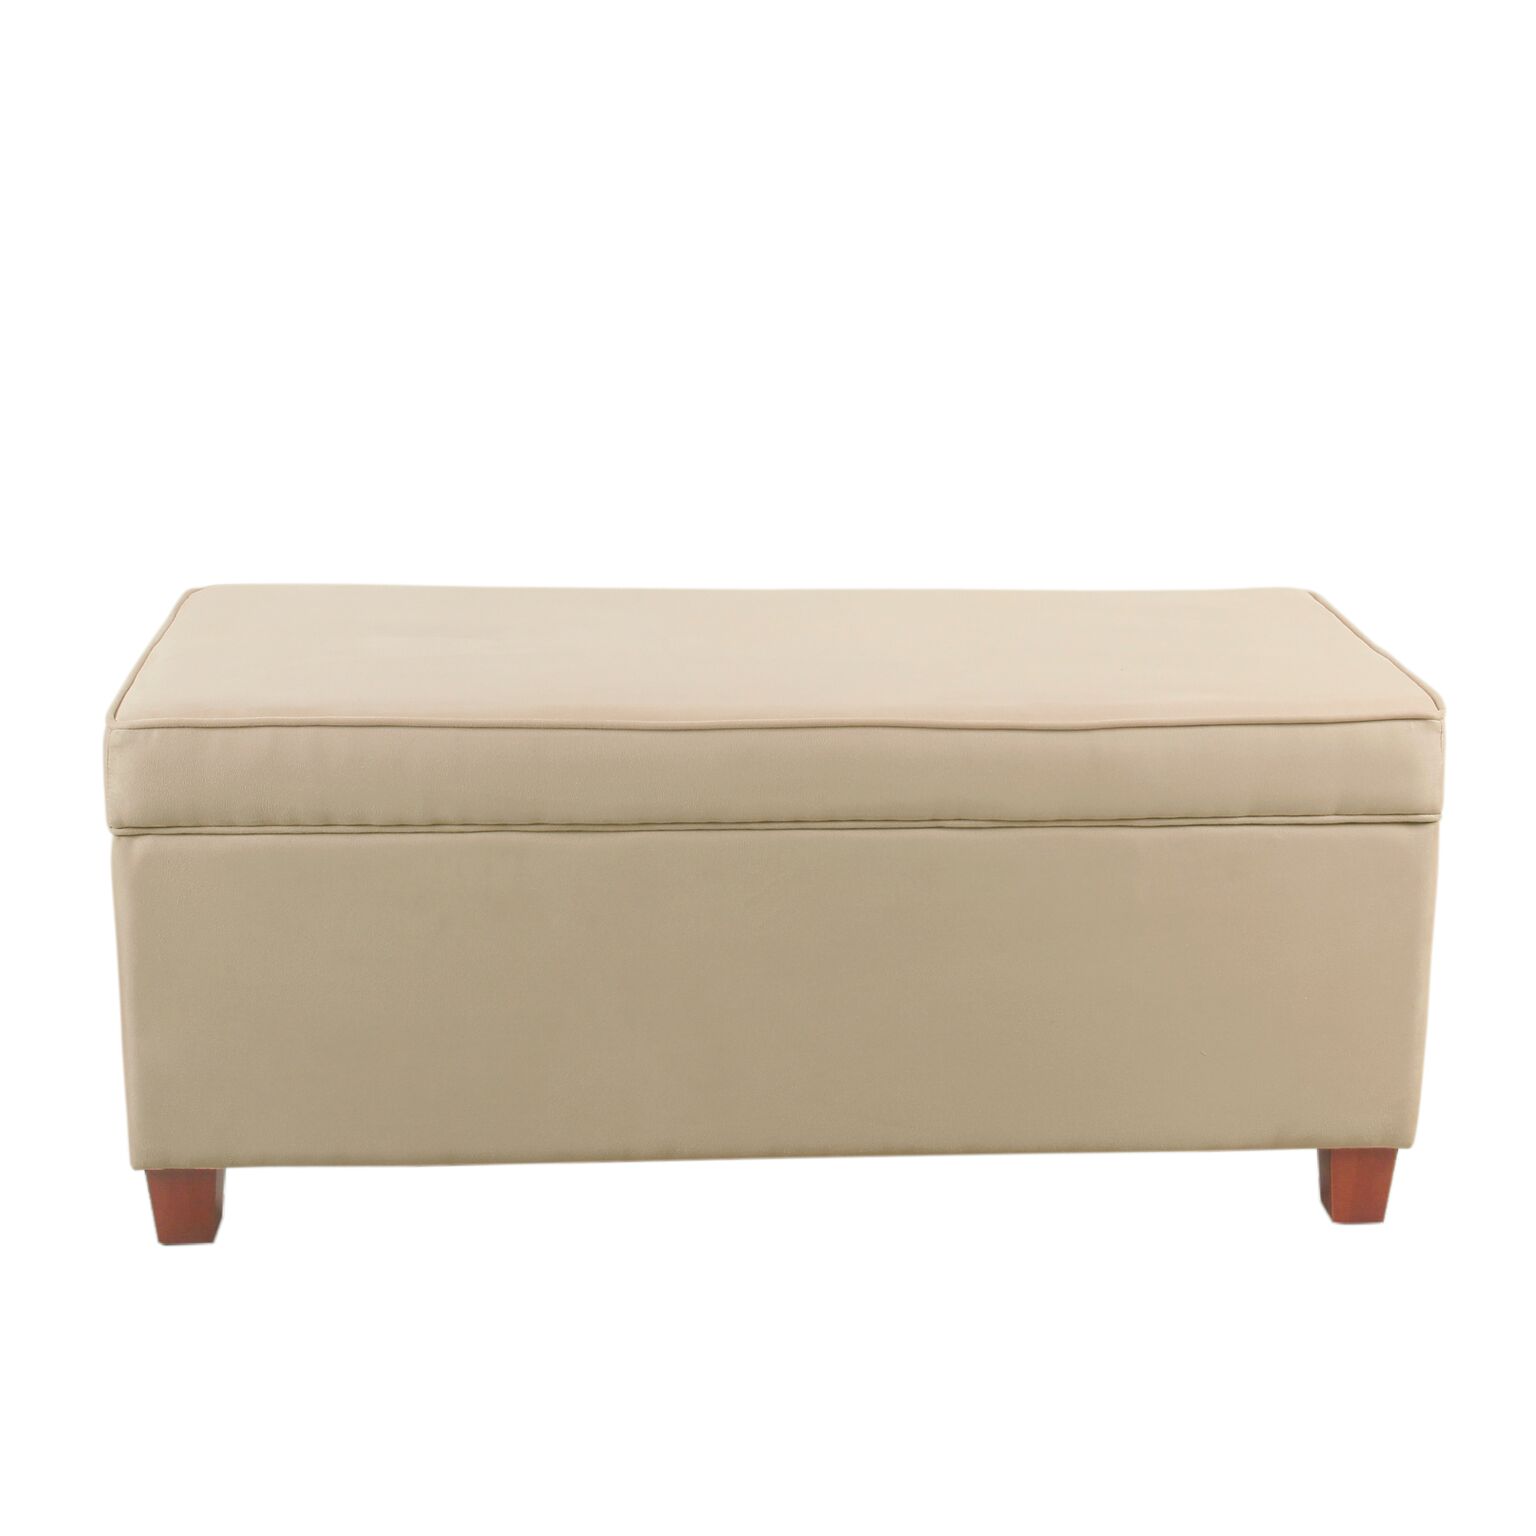 HomePop End of Bed Storage Bench, Cream - image 1 of 6